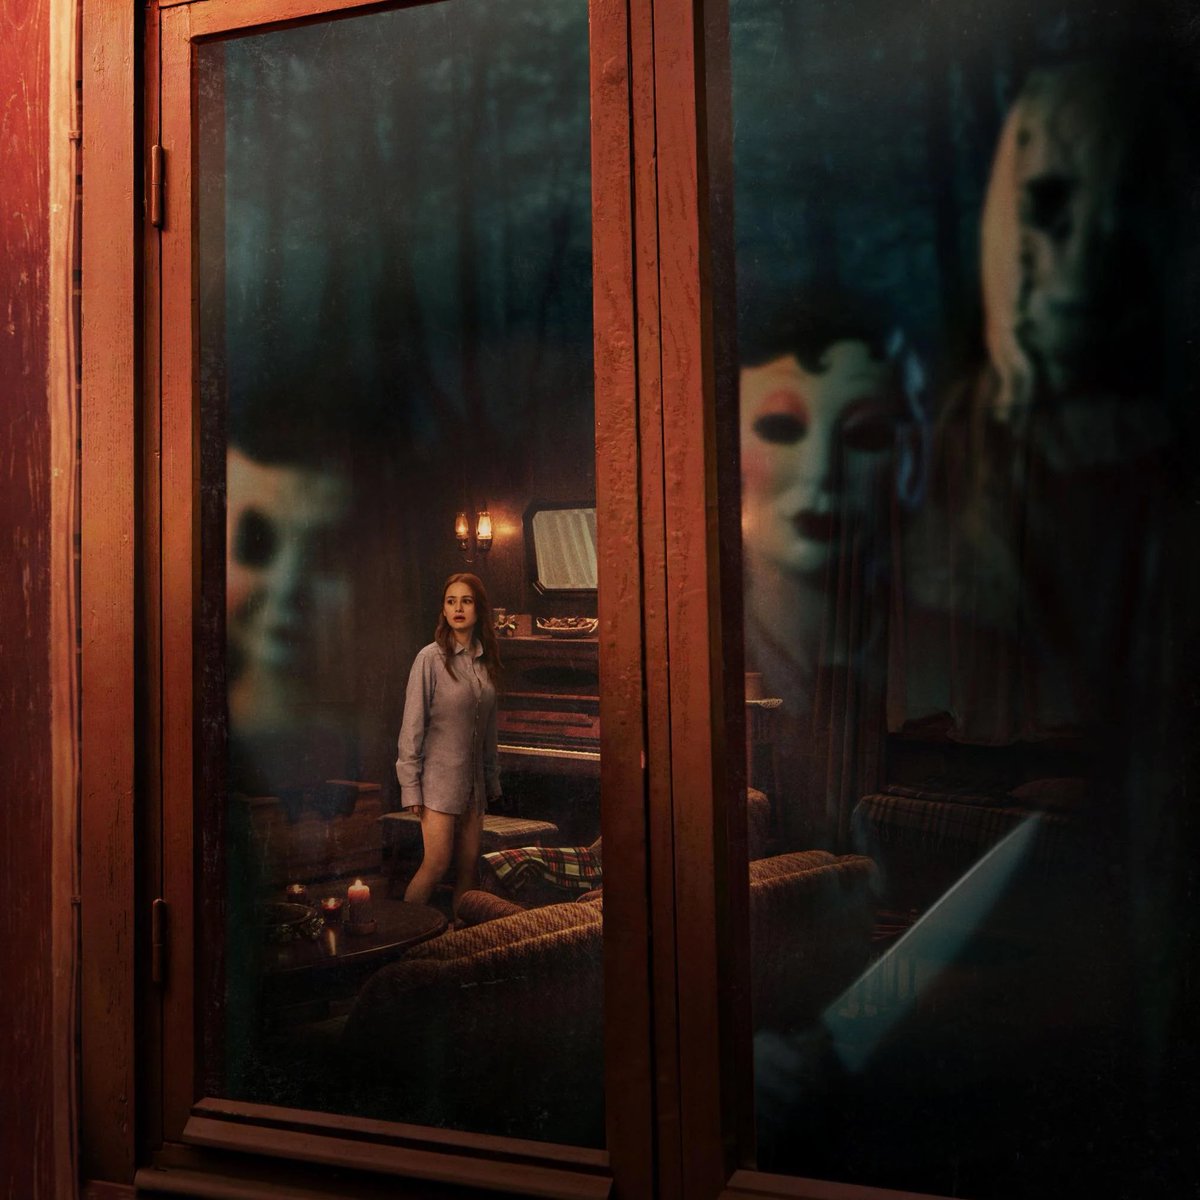 ‘IF’ and ‘THE STRANGERS: CHAPTER 1’ will both release in theaters in one week from today. Which one will you be watching first?